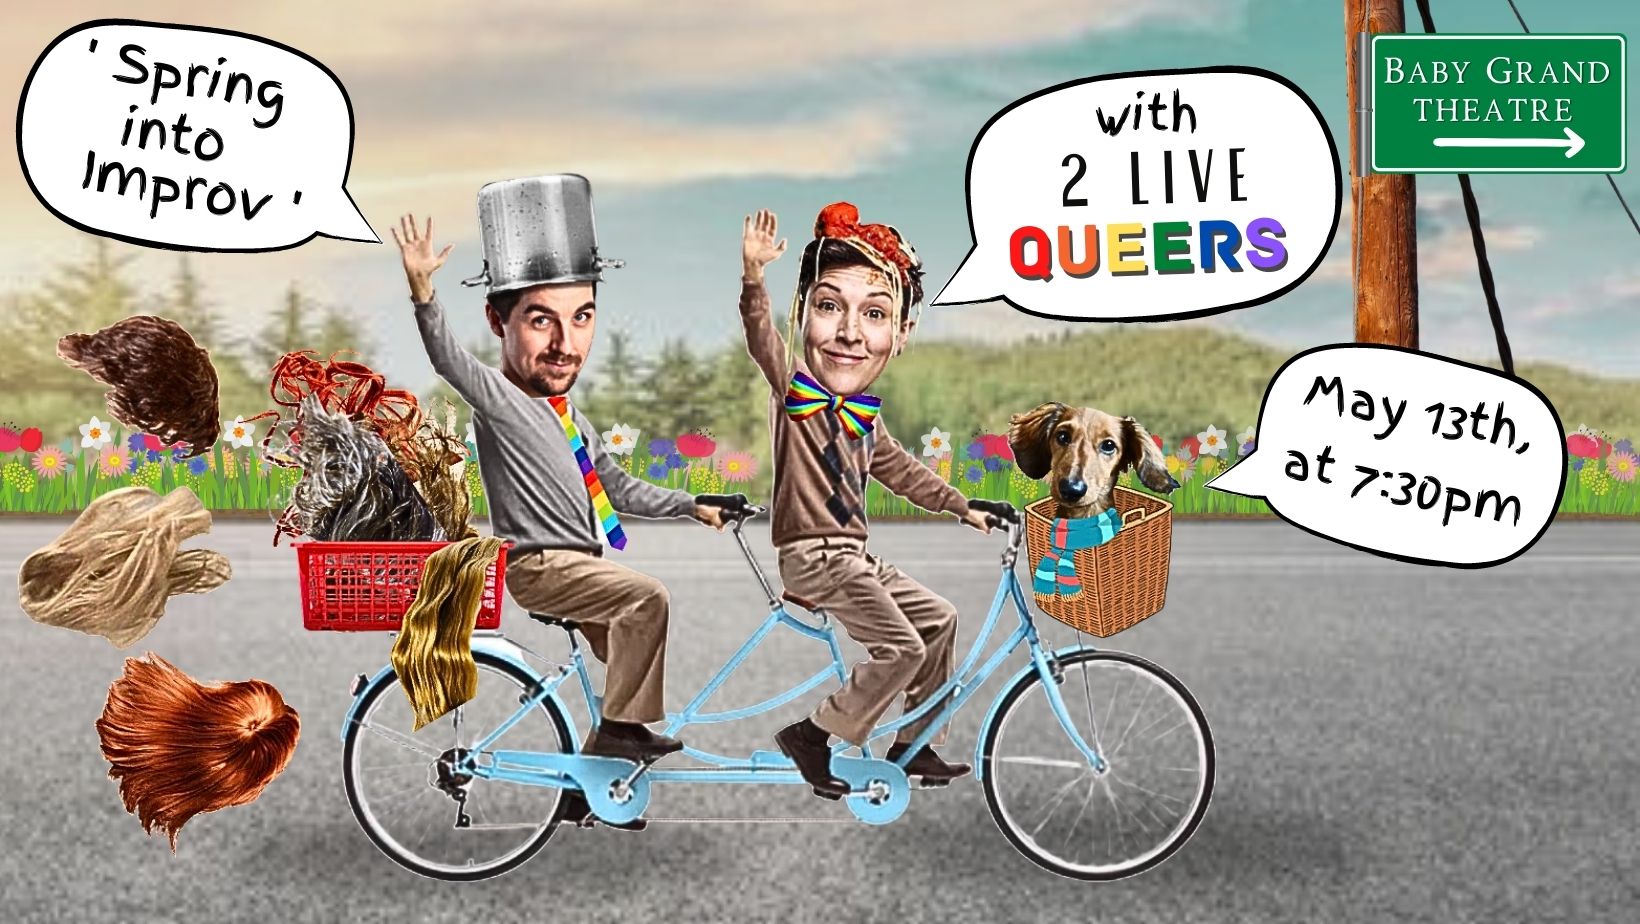 A clearly photoshopped image with Tony Babcock and Wilding riding a joint bicycle with a dog in the front basket. Tony has a speech bubble the reads "'Spring into Improv'" and Wilding has a speech bubble that reads "with 2 live Queers" and the dog has a speech bubble that reads "May 13th, at 7:30pm." There is also a sign that reads "Baby Grand Theatre"